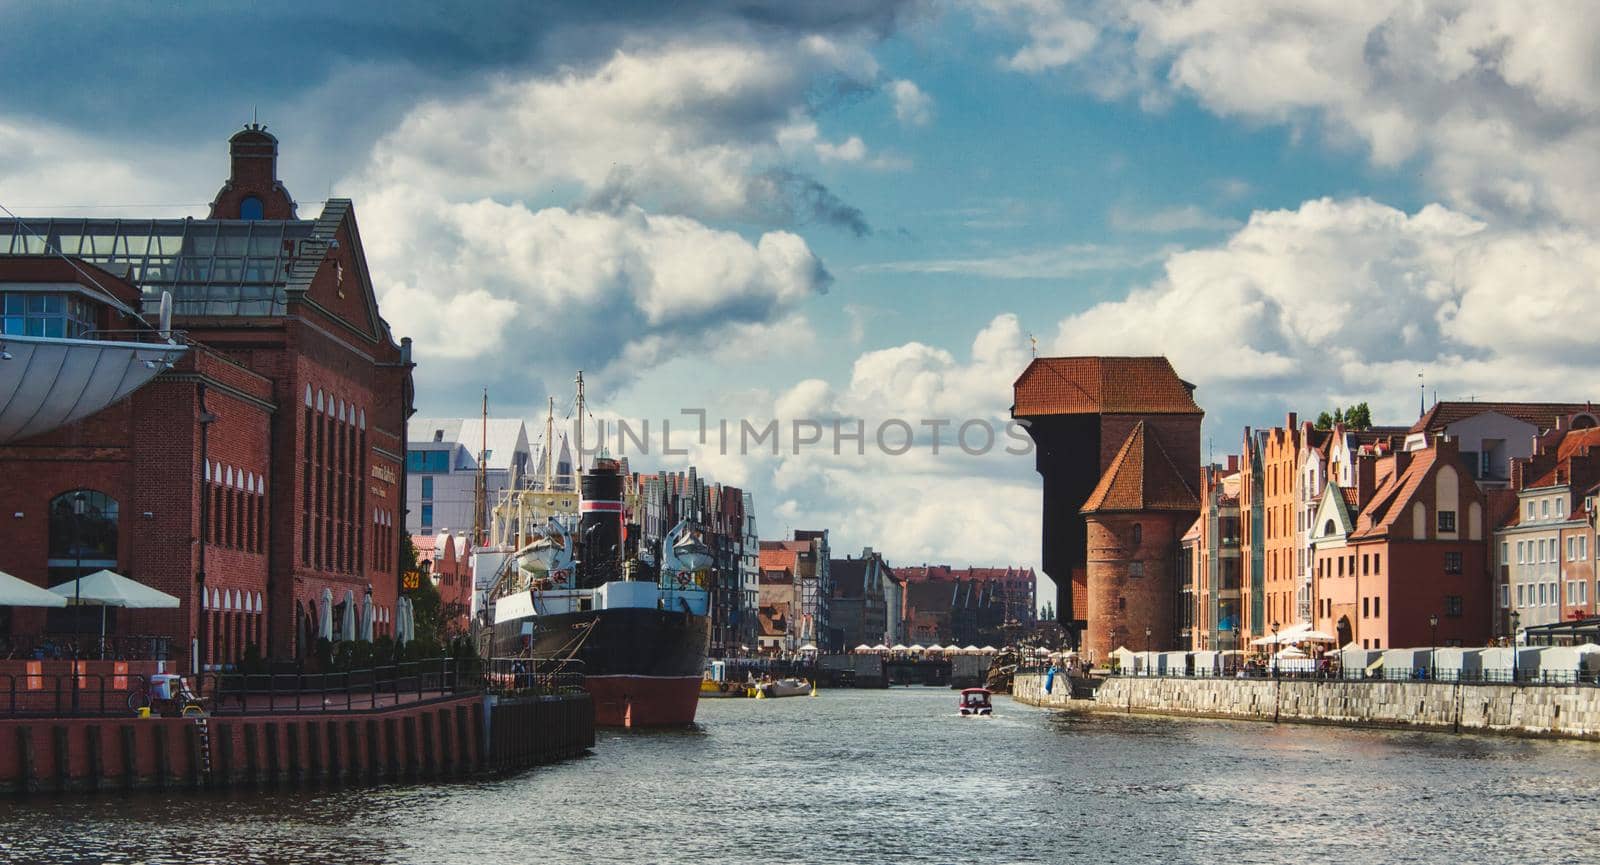 Wide panorama view of the river in Gdansk showing the old town crane